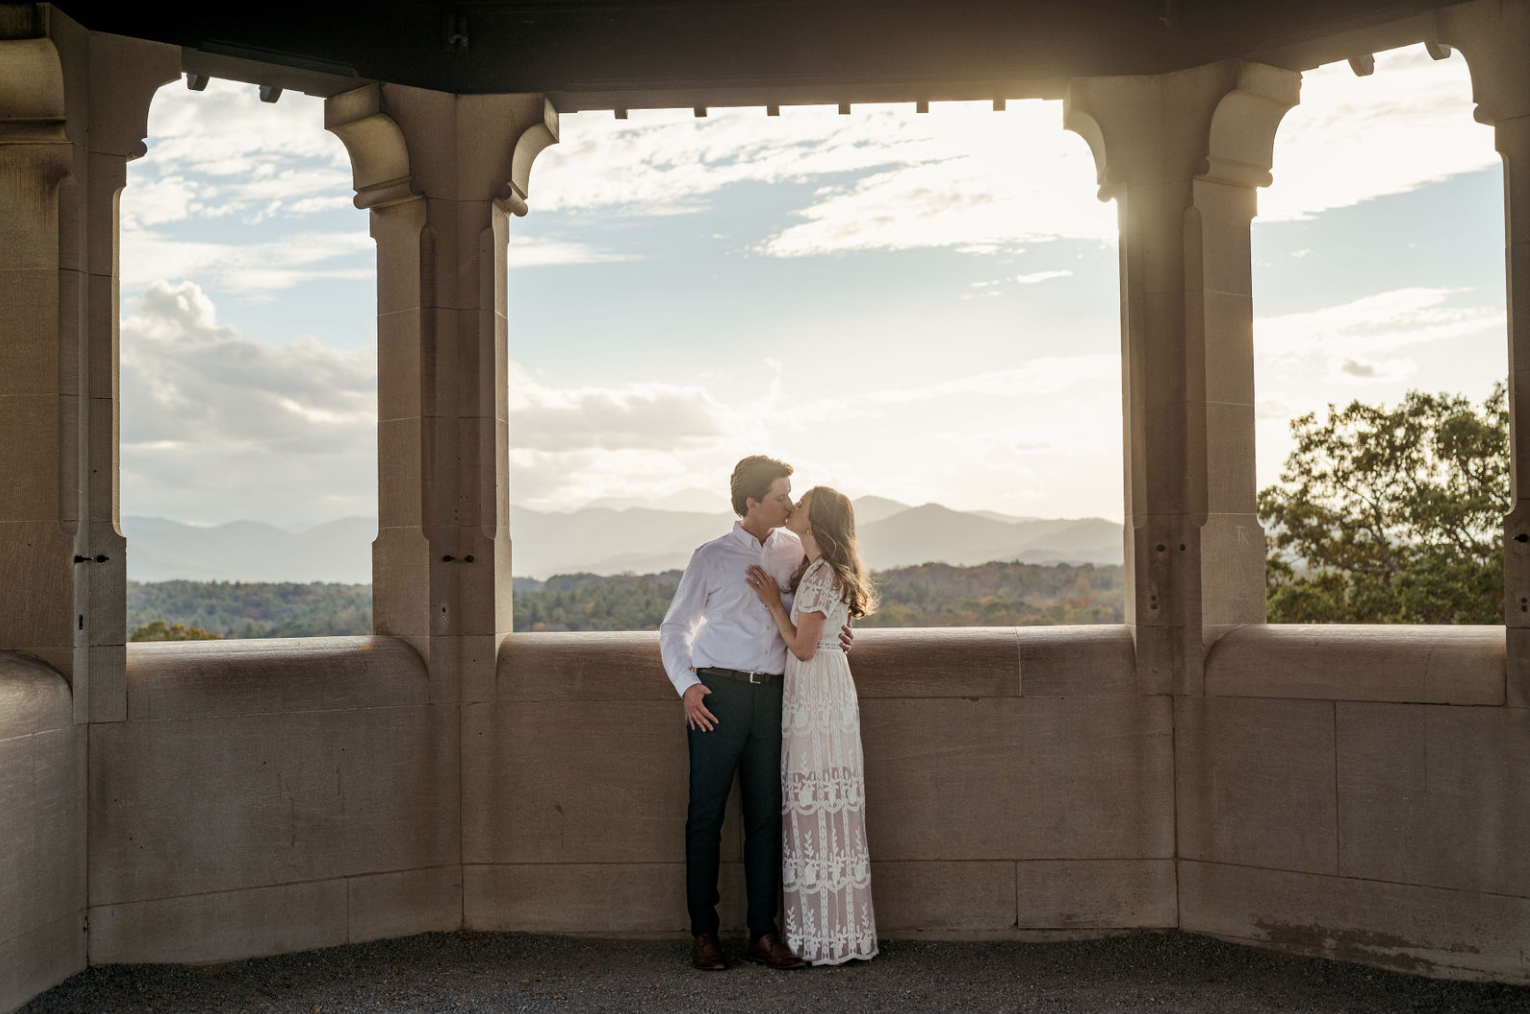 Couple kissing on rooftop at Biltmore Estate with mountains in background